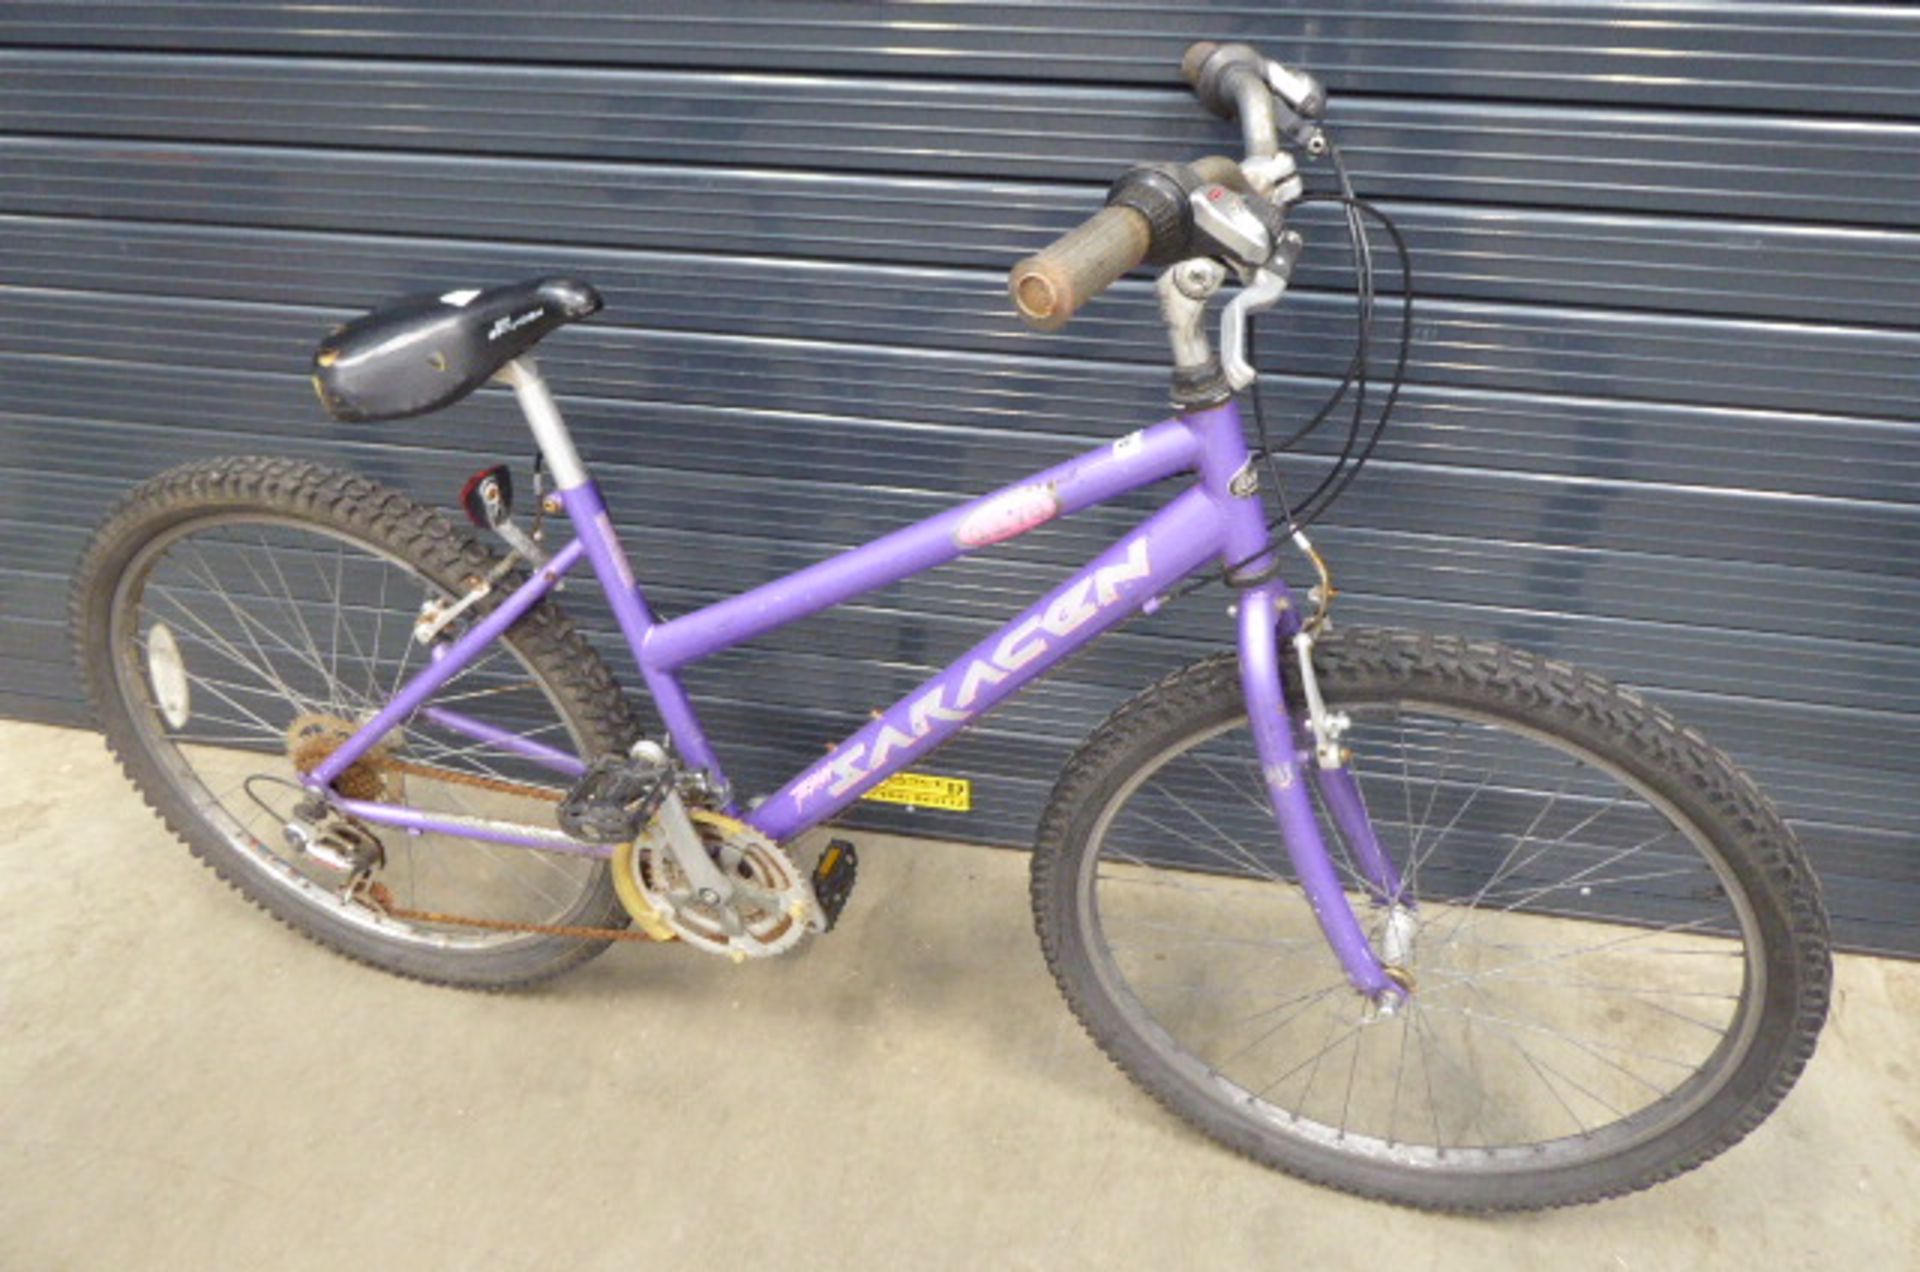 Saracen purple and pink girls cycle - Image 2 of 2